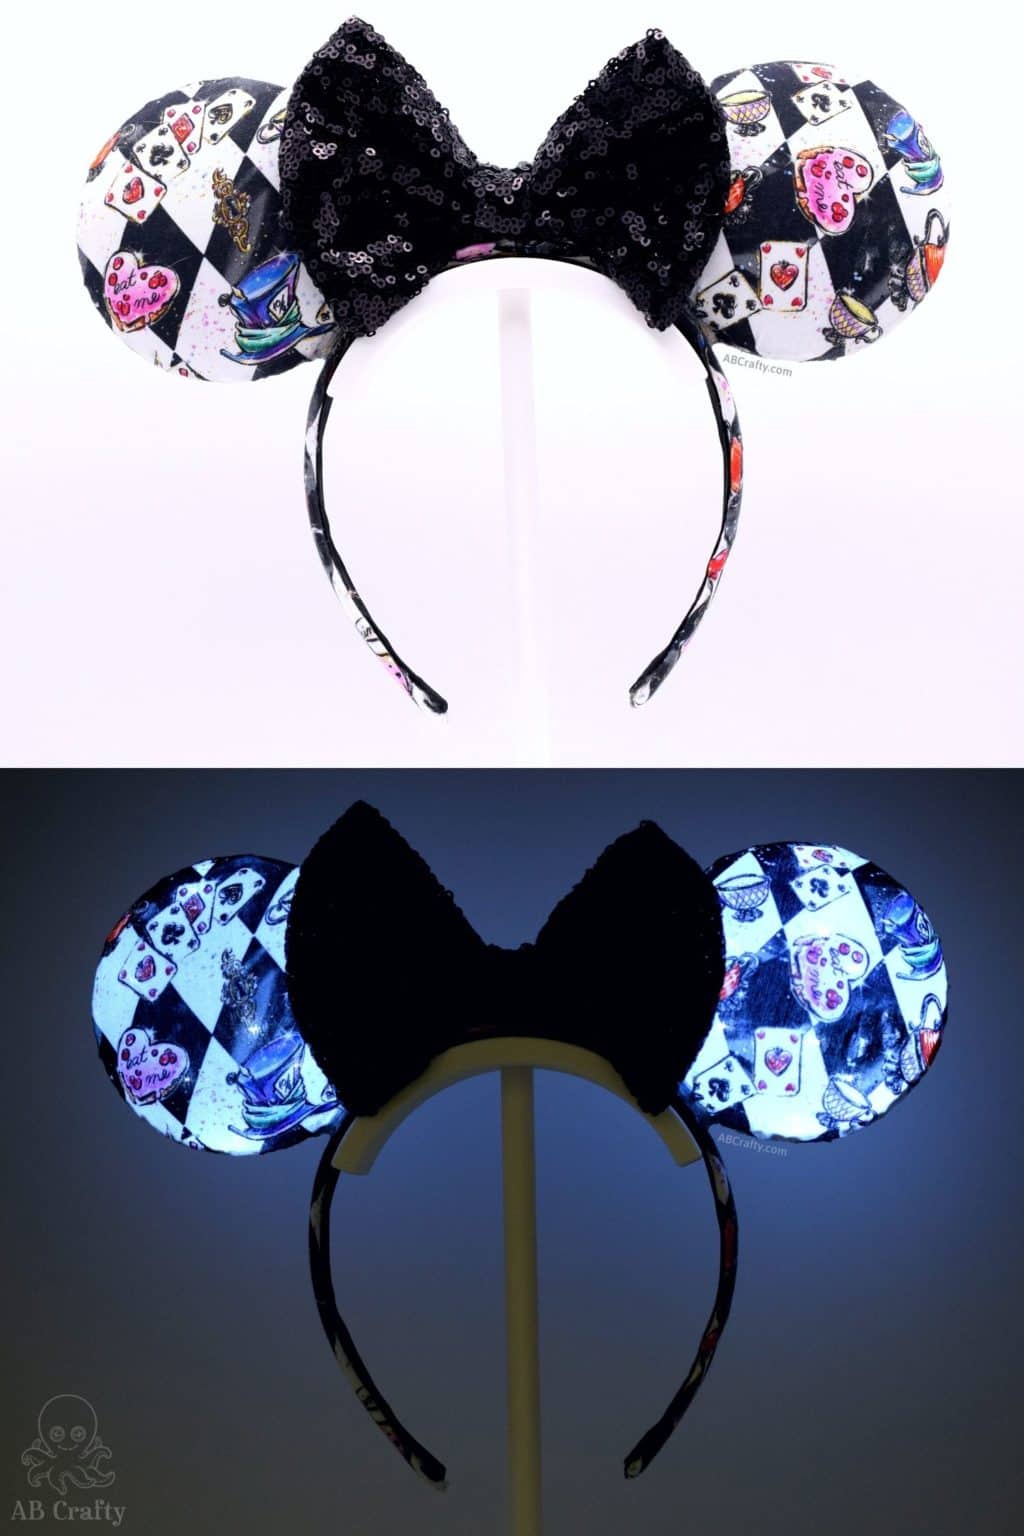 top photo is the finished alice and wonderland disney ears with black sequin bow and checkerboard alice in wonderland fabric and the bottom image is the ears lit up in the dark